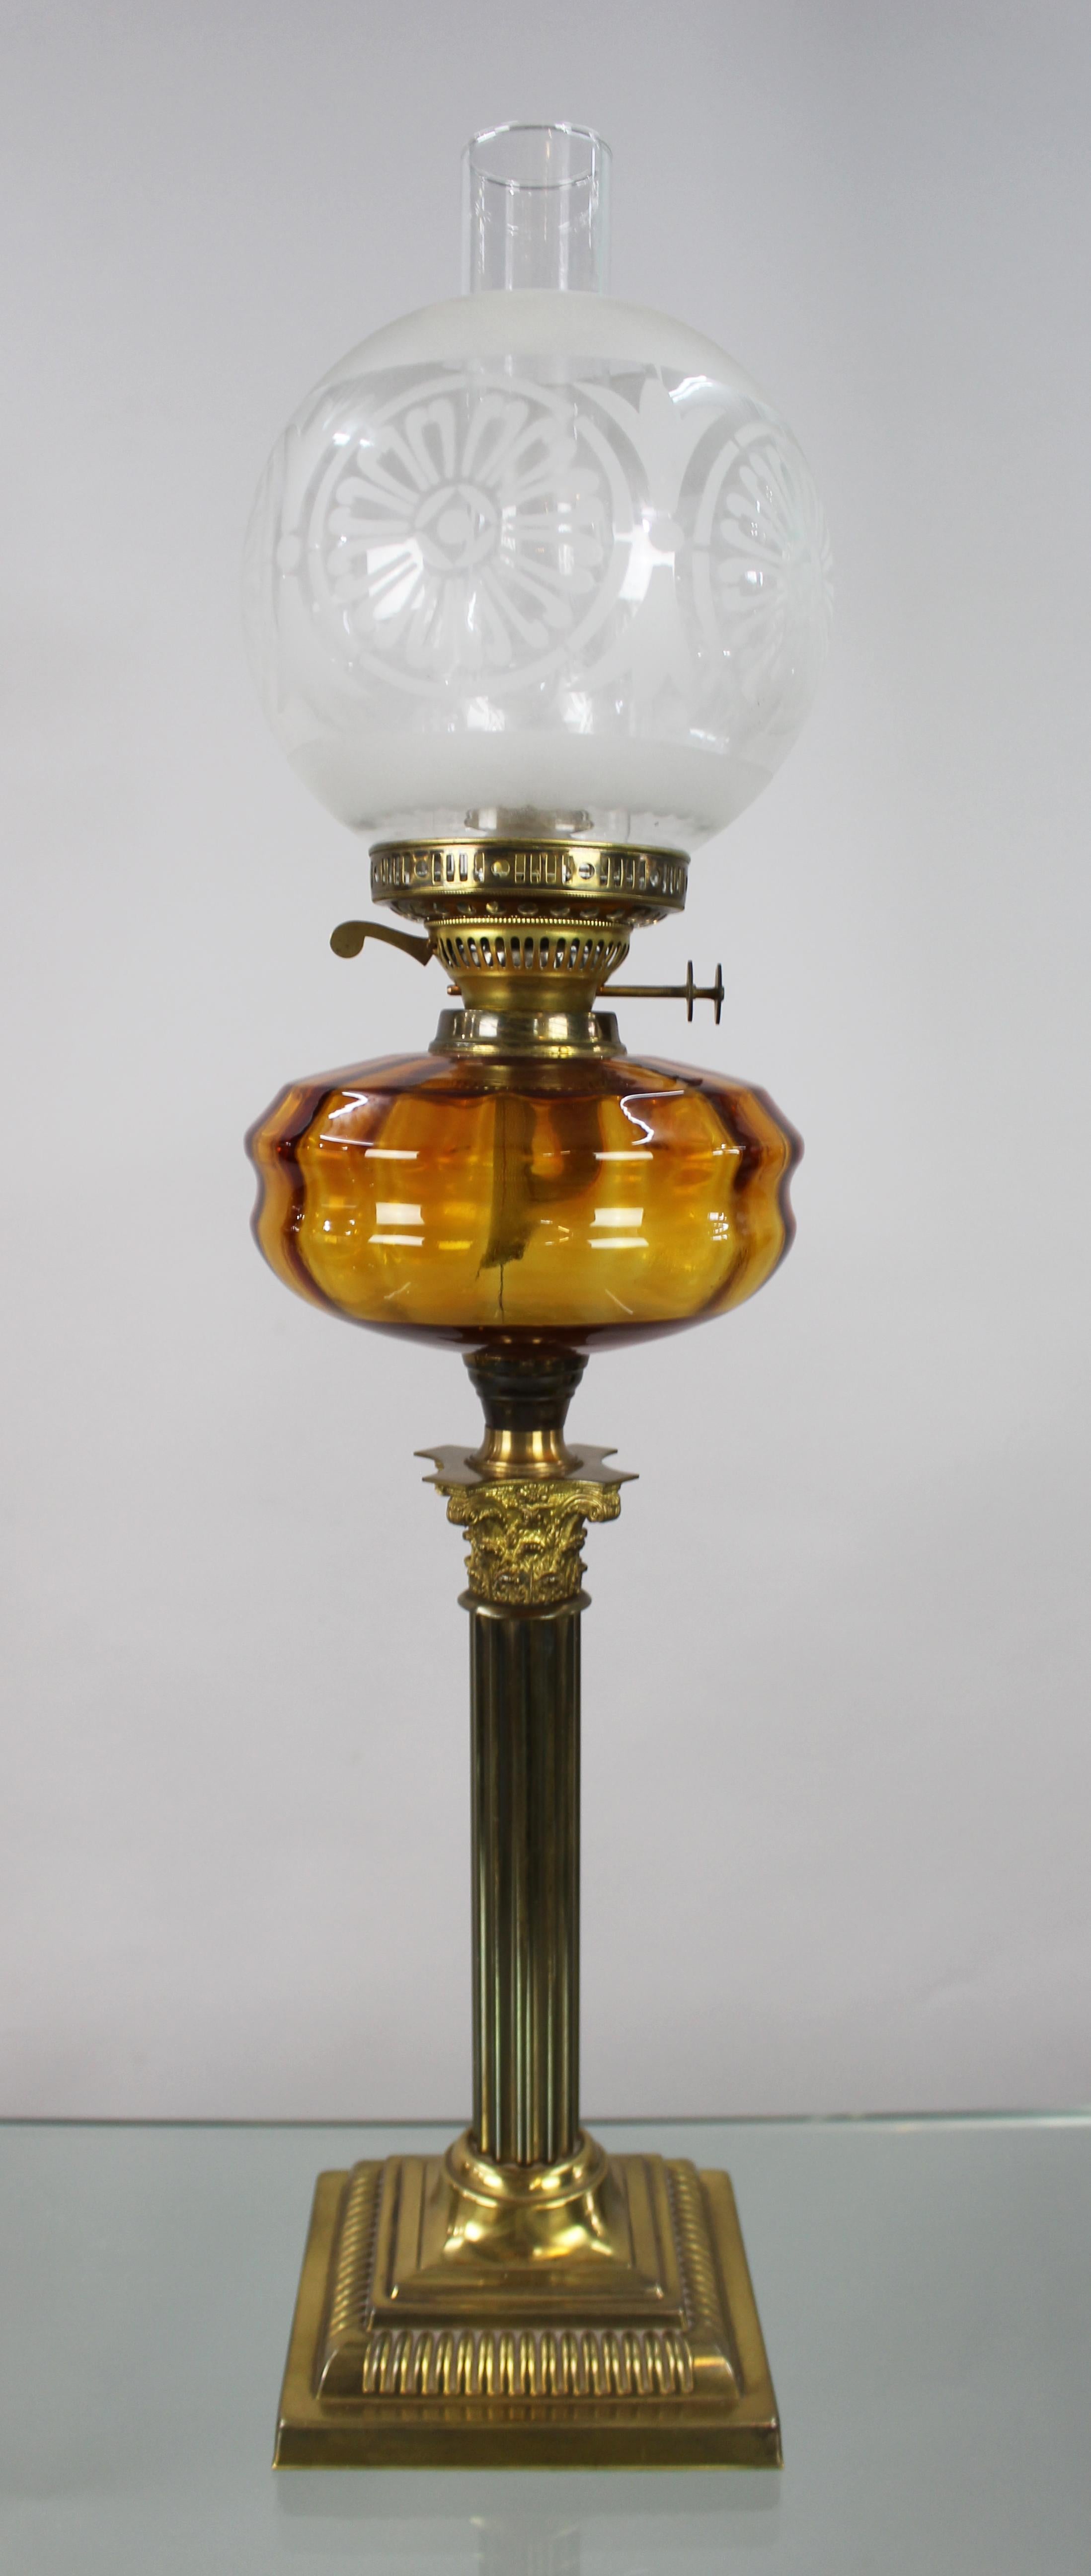 Victorian brass oil lamp with amber font 


Victorian, English

Etched glass shade with chimney and duplex burner. Amber font & heavy brass Corinthian column base. 

Measures: Width: 18 cm 

Height: 75.5 cm

Very good condition